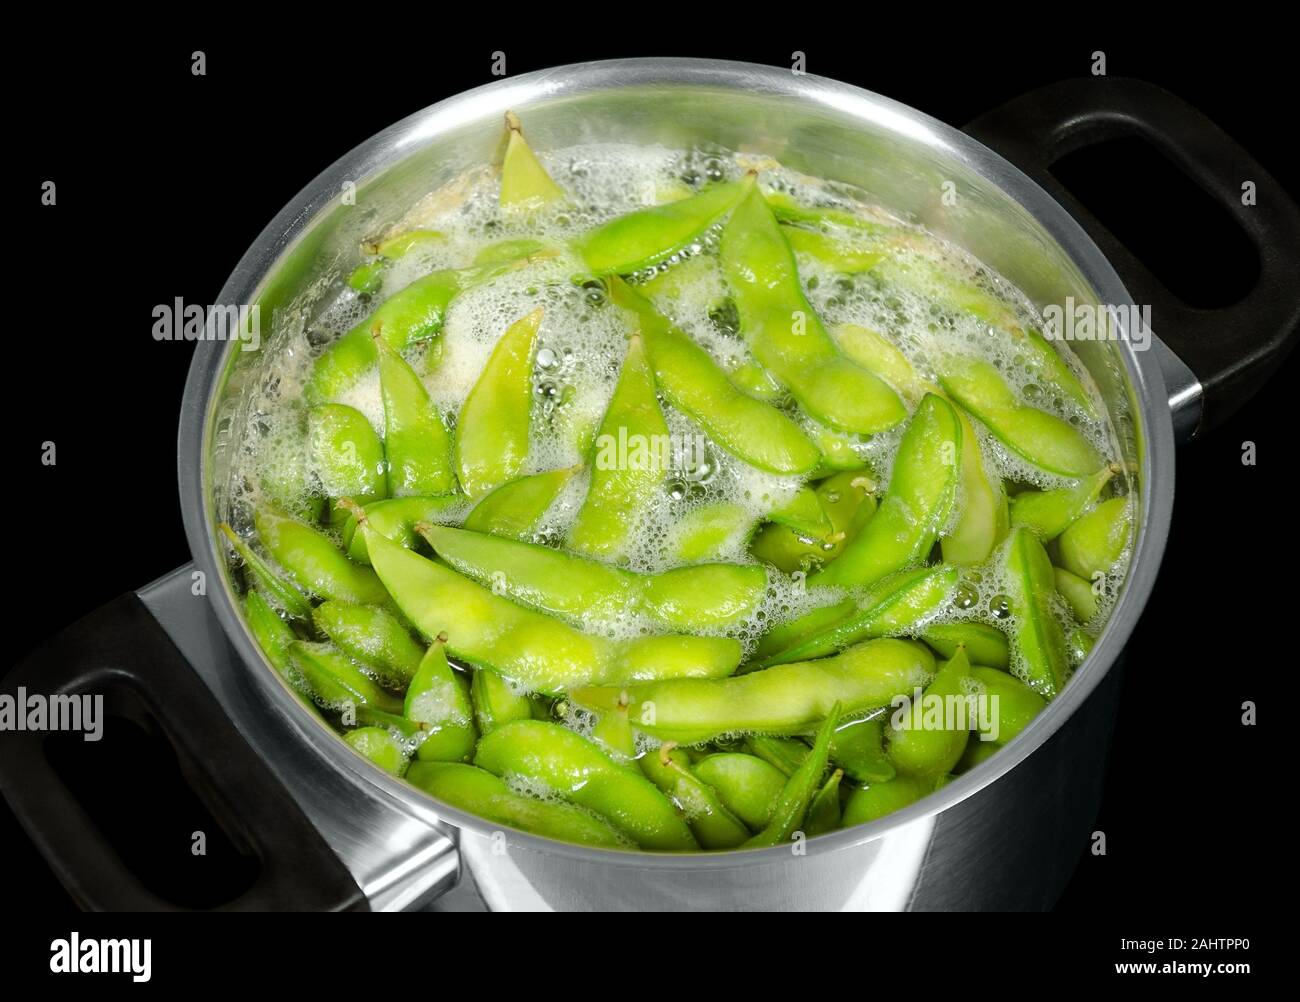 Edamame, green soybeans, maodou, boiling in saltwater in a metal pot. Soy beans, Glycine max., a legume that bis rich on protein. Stock Photo